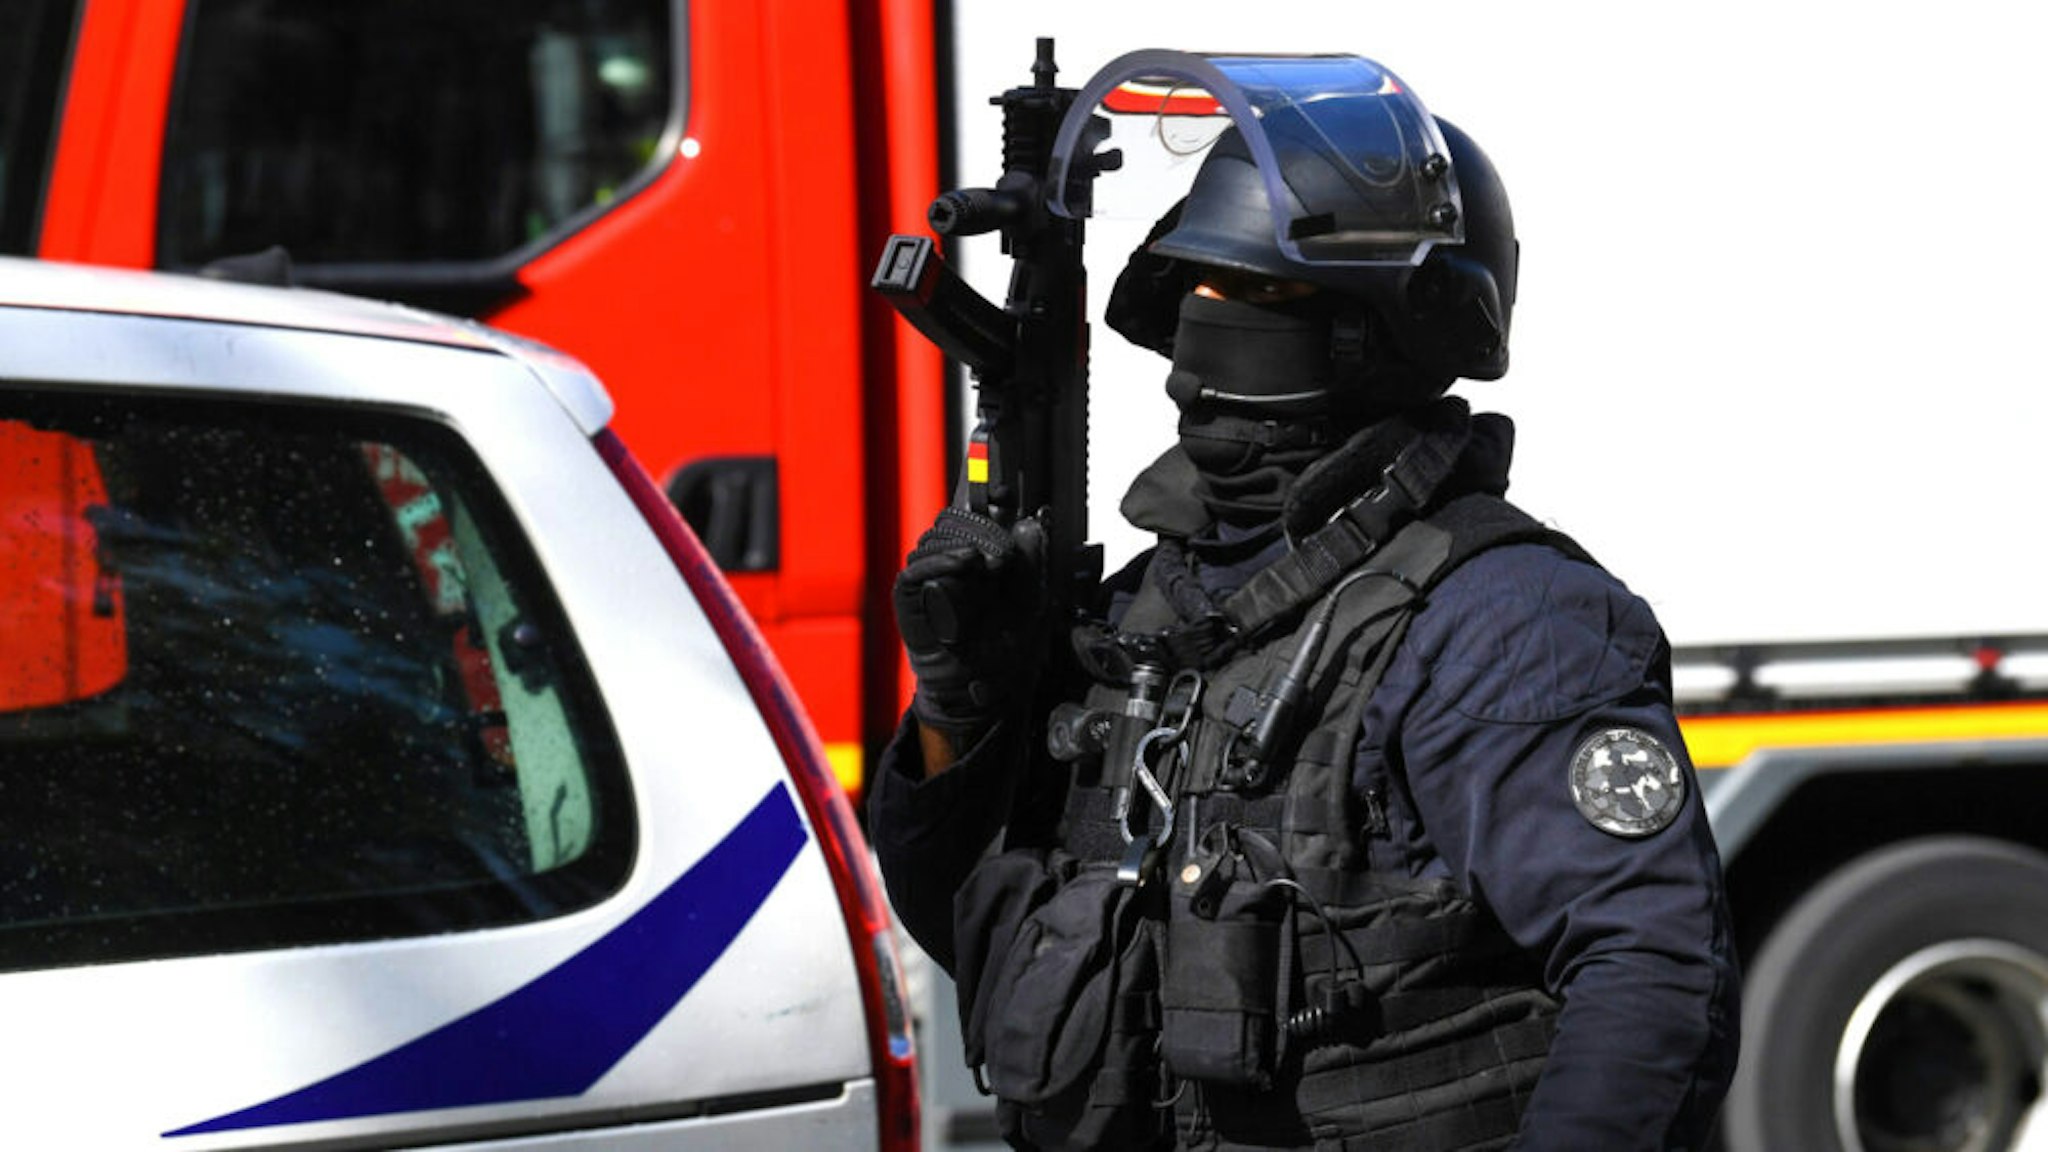 A French police intervention unit (GSO) officer secures the area after several people were injured near the former offices of the French satirical magazine Charlie Hebdo following an attack by a man wielding a knife in the capital Paris on September 25, 2020. - Four people were injured, two seriously, in a knife attack in Paris on September 25, 2020, near the former offices of French satirical magazine Charlie Hebdo, a source close to the investigation told AFP. Two of the victims were in a critical condition, the Paris police department said, adding two suspects were on the run. The stabbing came as a trial was underway in the capital for alleged accomplices of the authors of the January 2015 attack on the Charlie Hebdo weekly that claimed 12 lives.